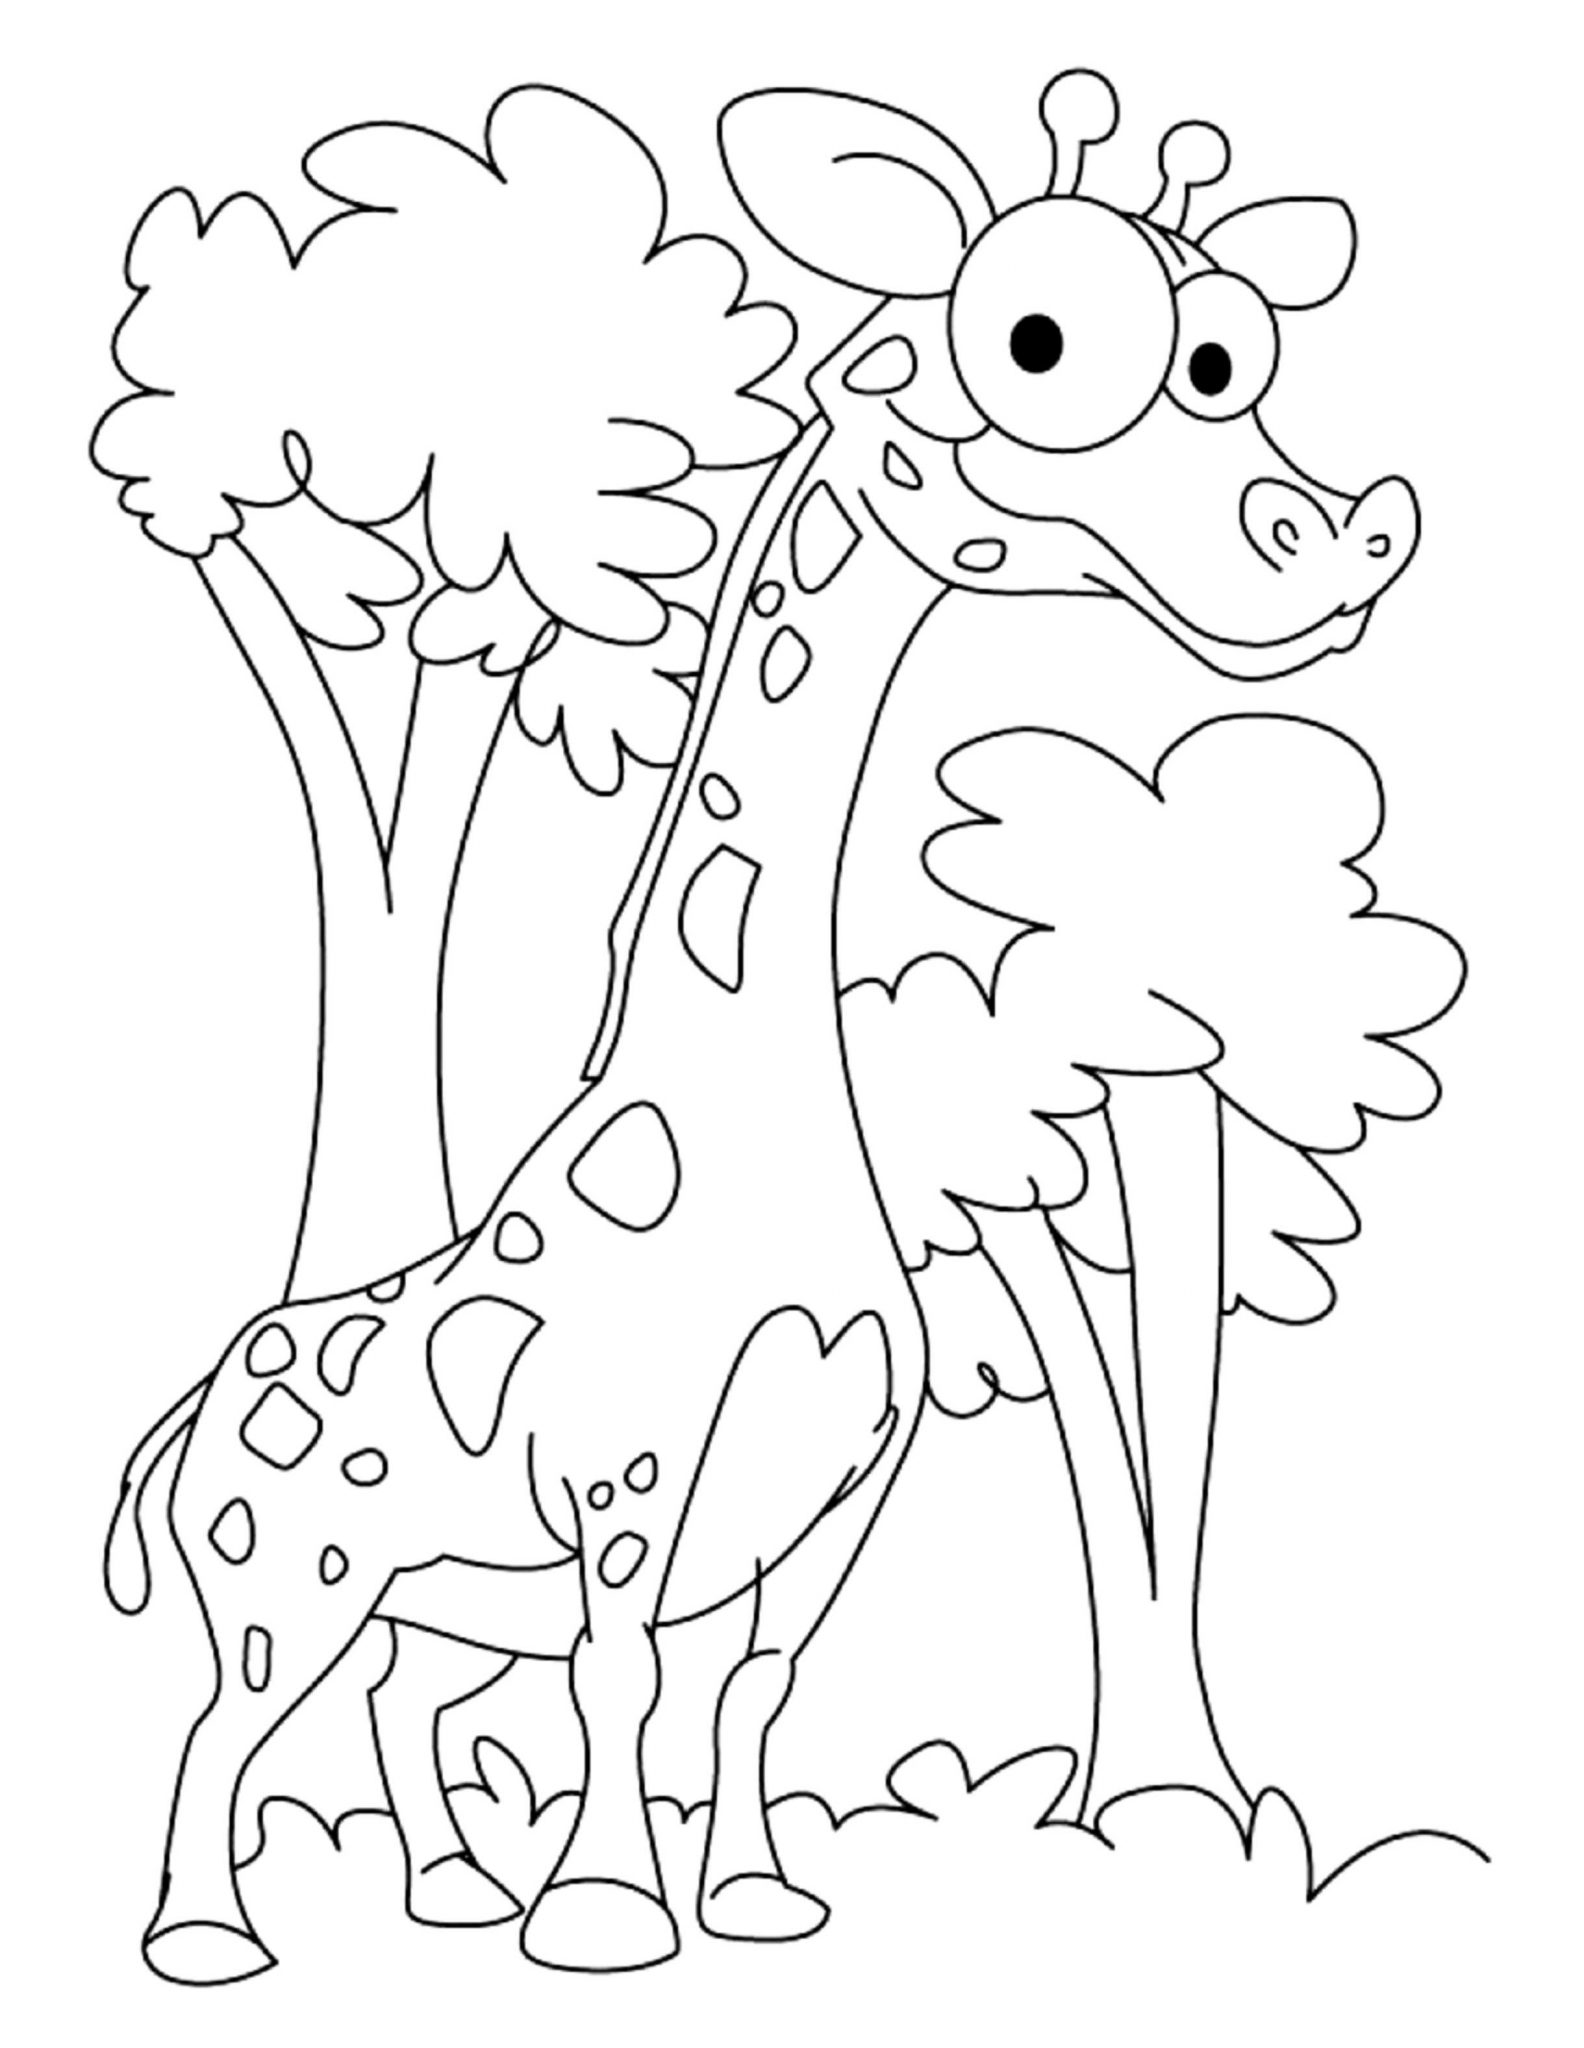 Print Download Giraffe Coloring Pages for Kids to Have Fun